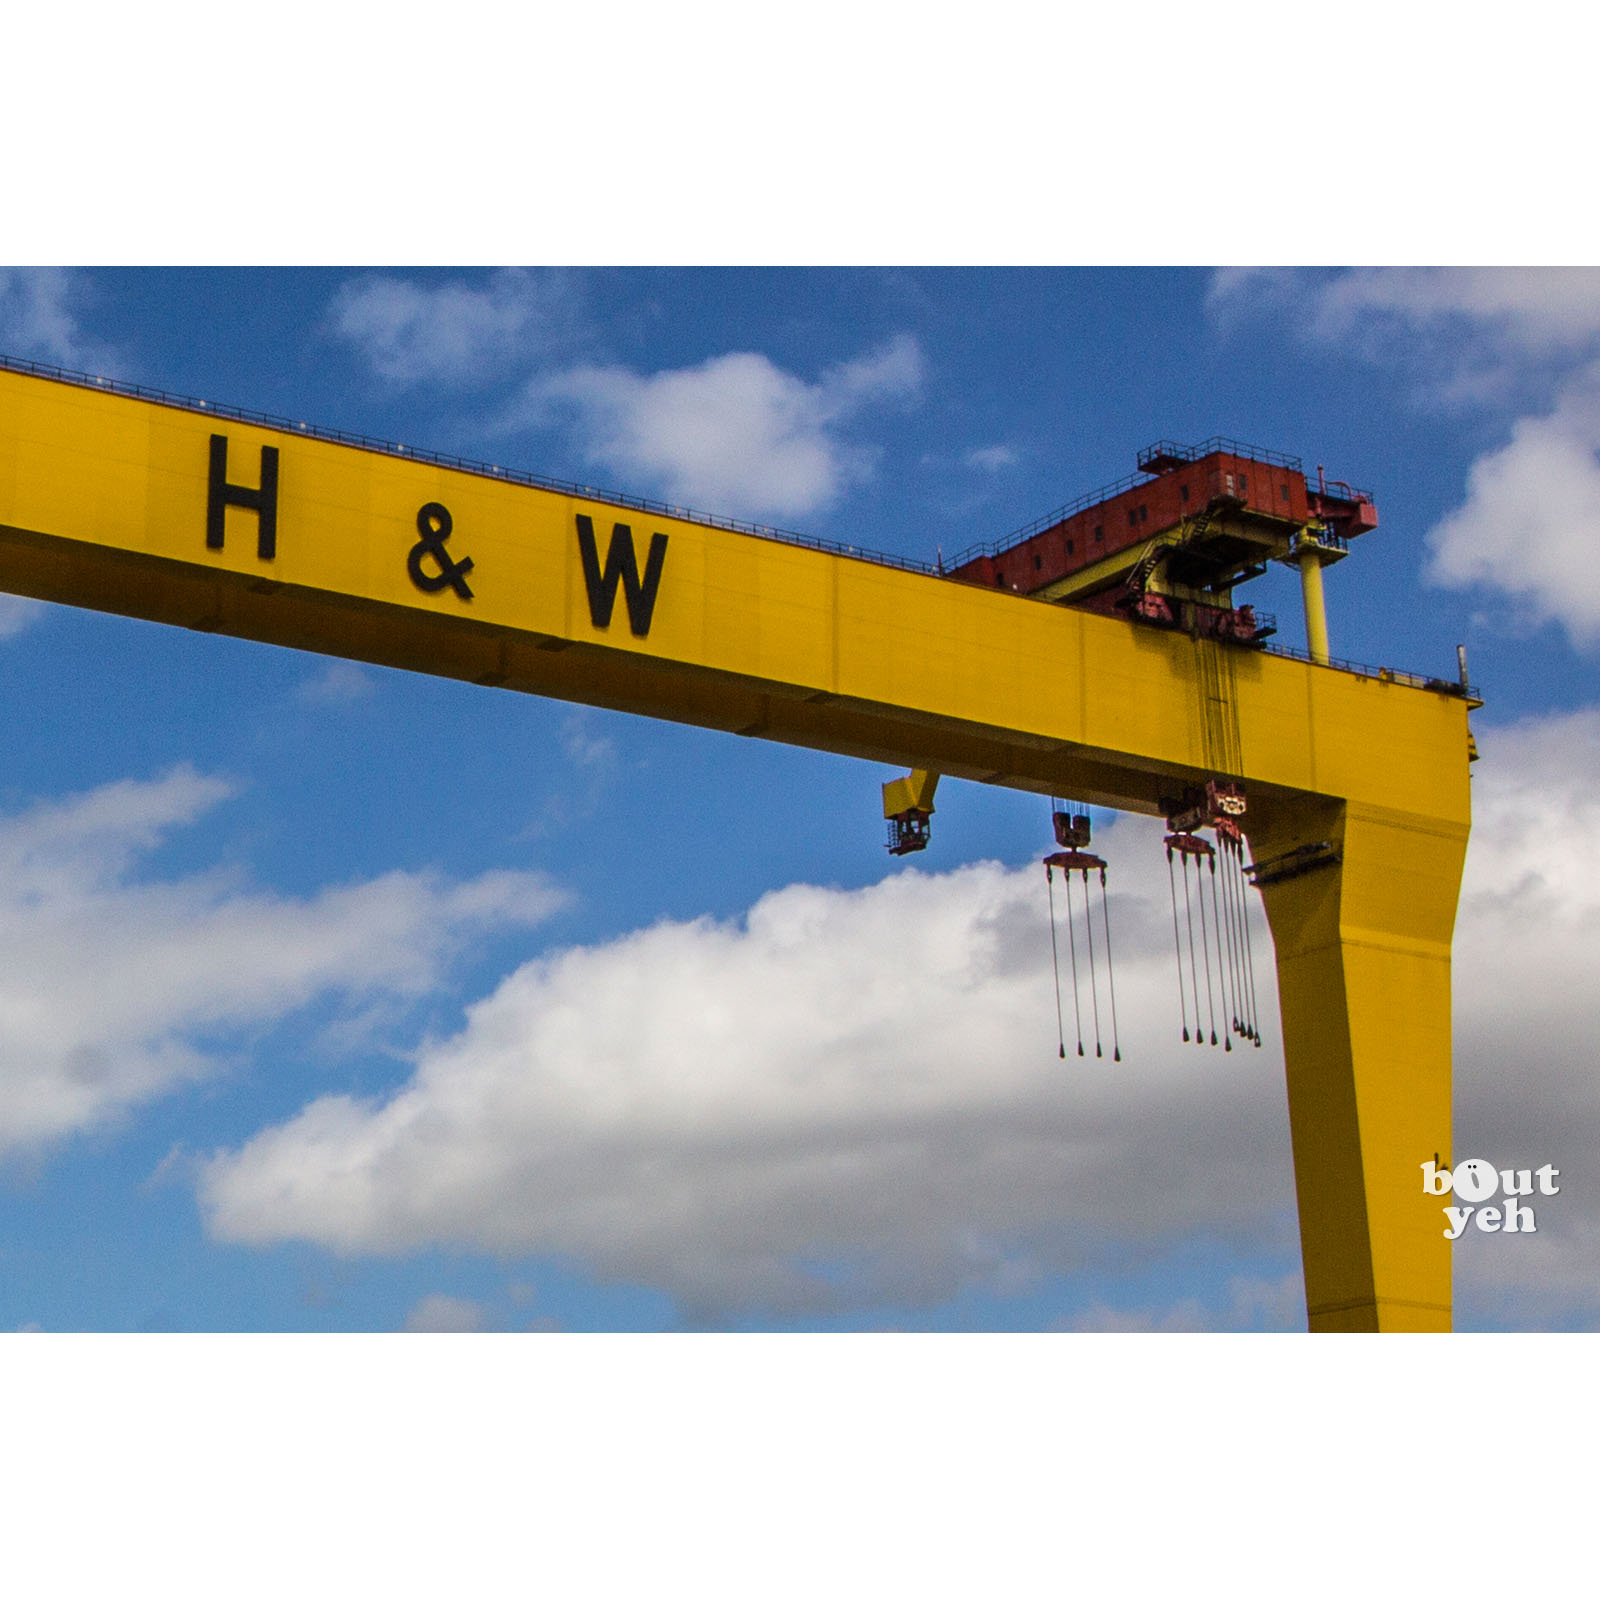 Image - Featured photographer, Justin McLean, photograph of Harland and Wolff Crane, Belfast.